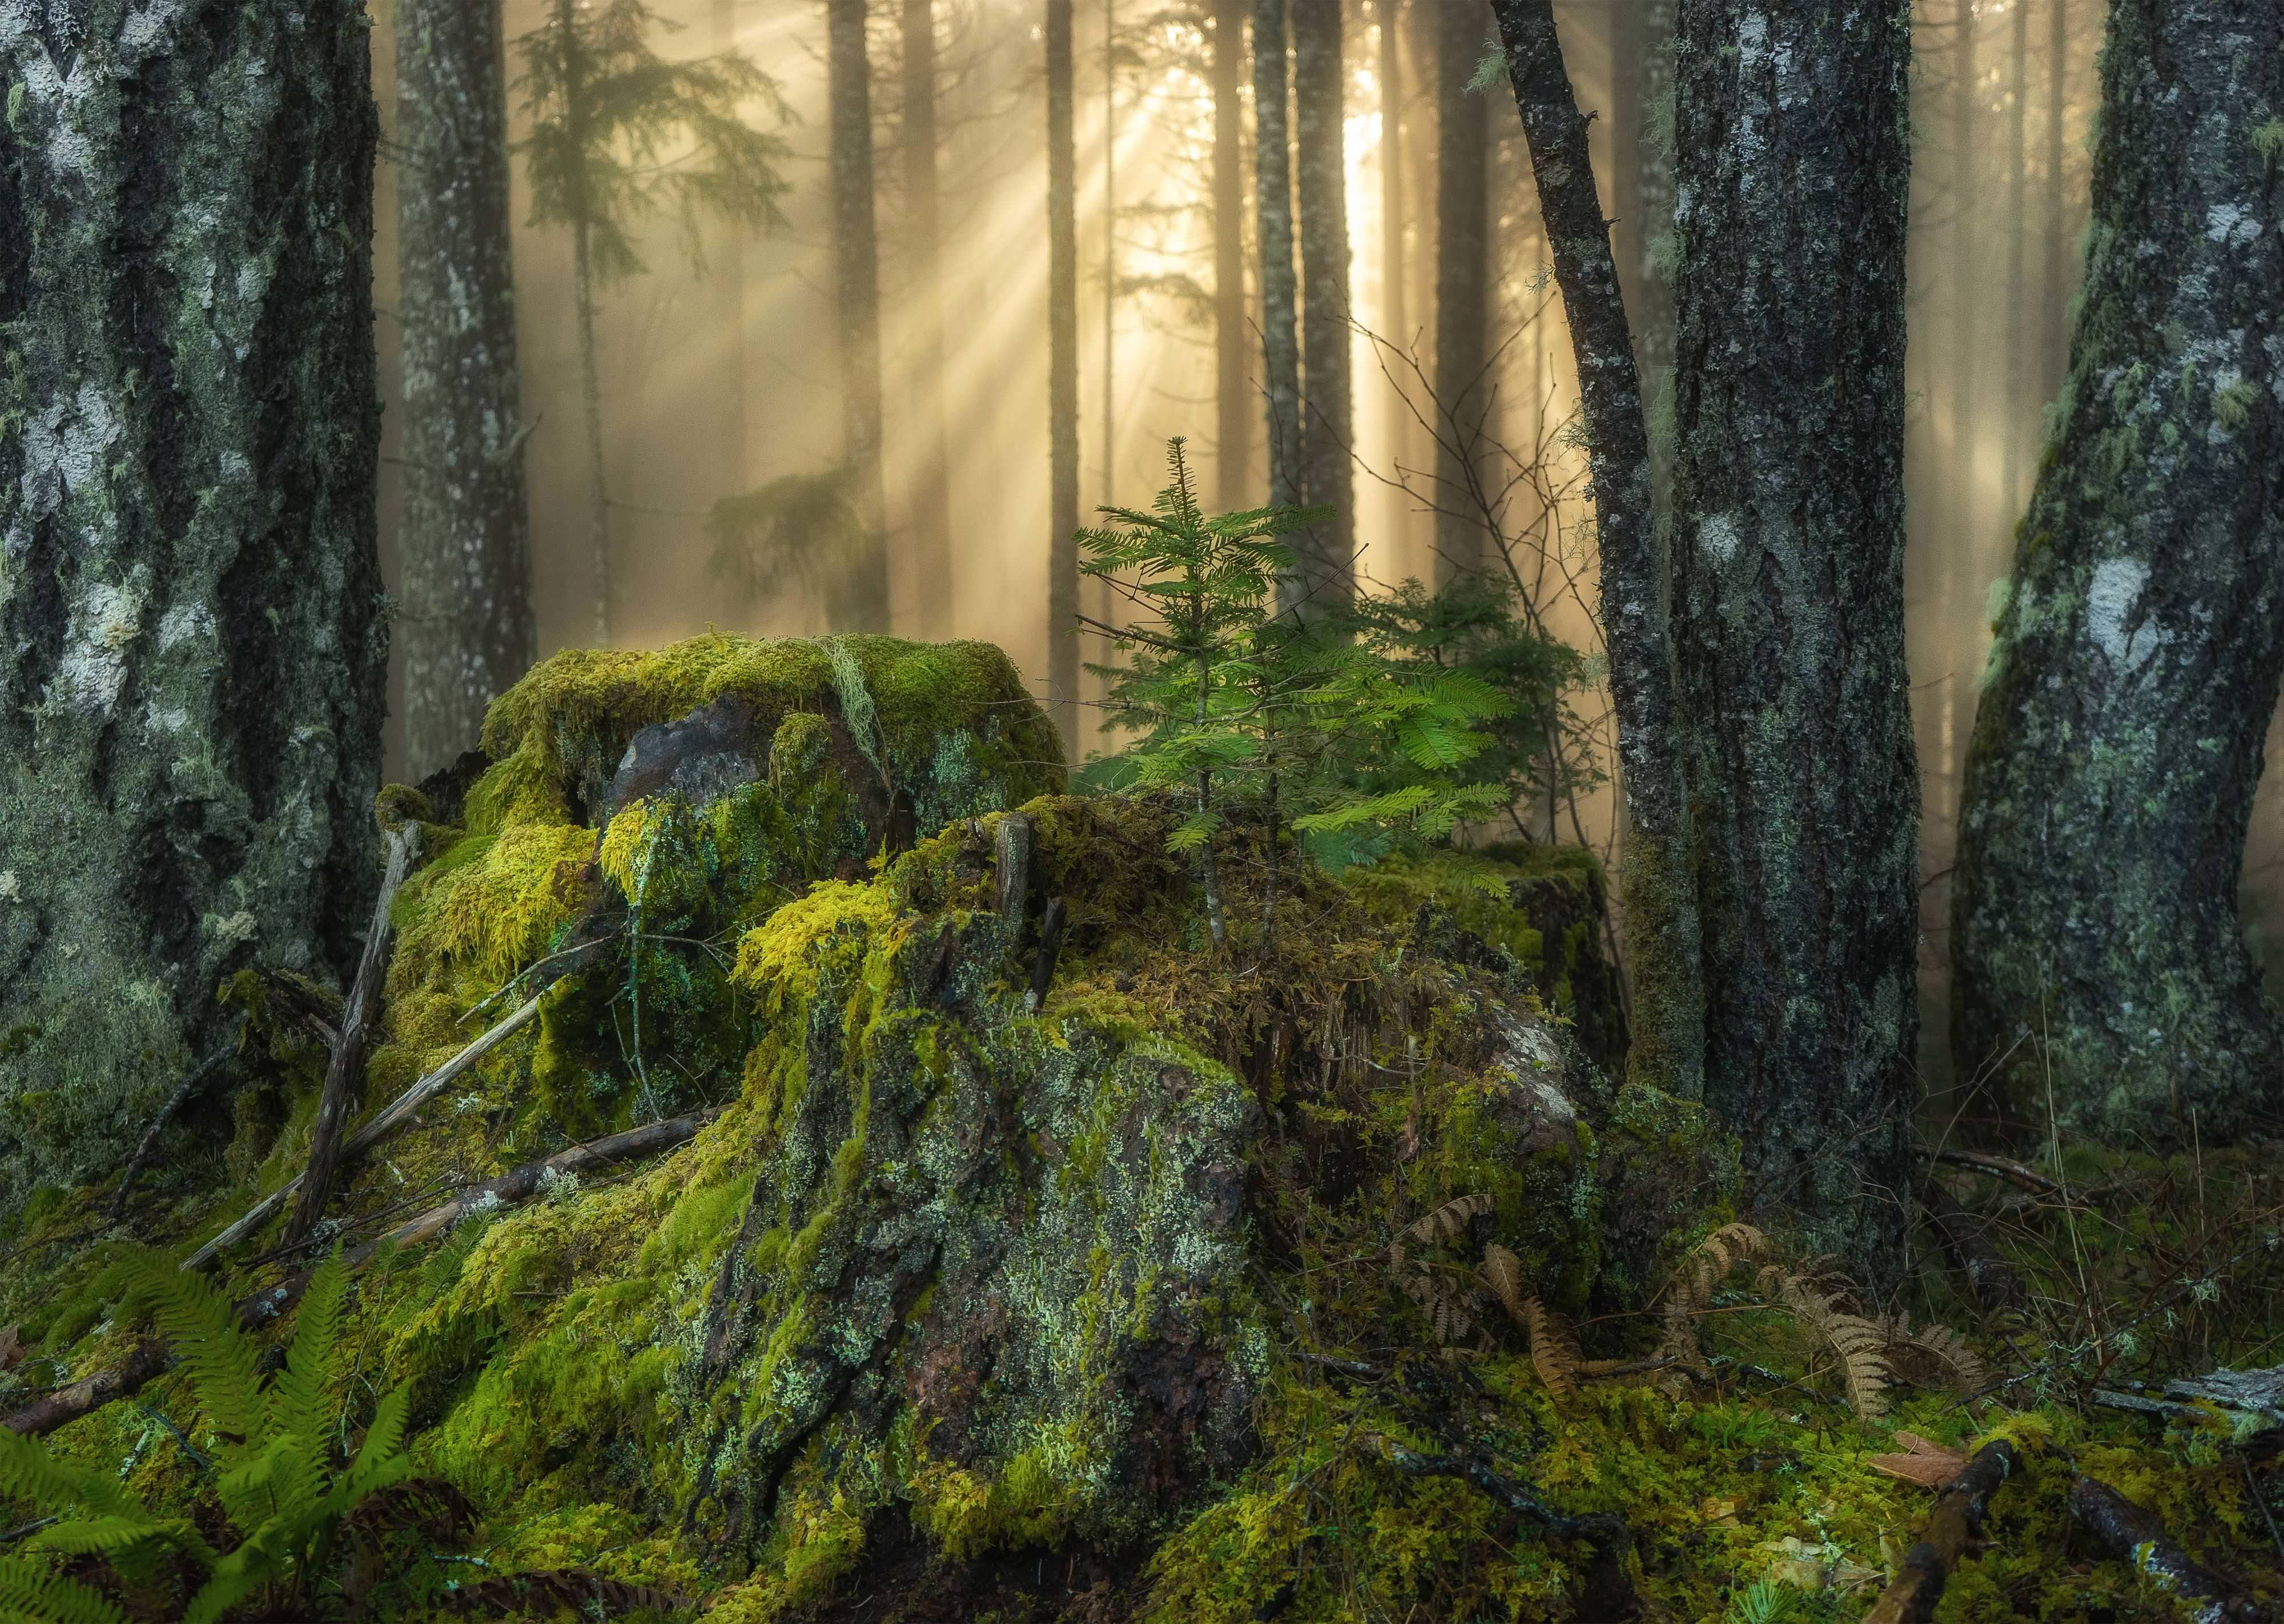 Sunlight beams through trees in a forest with moss covering rocks in the foreground.